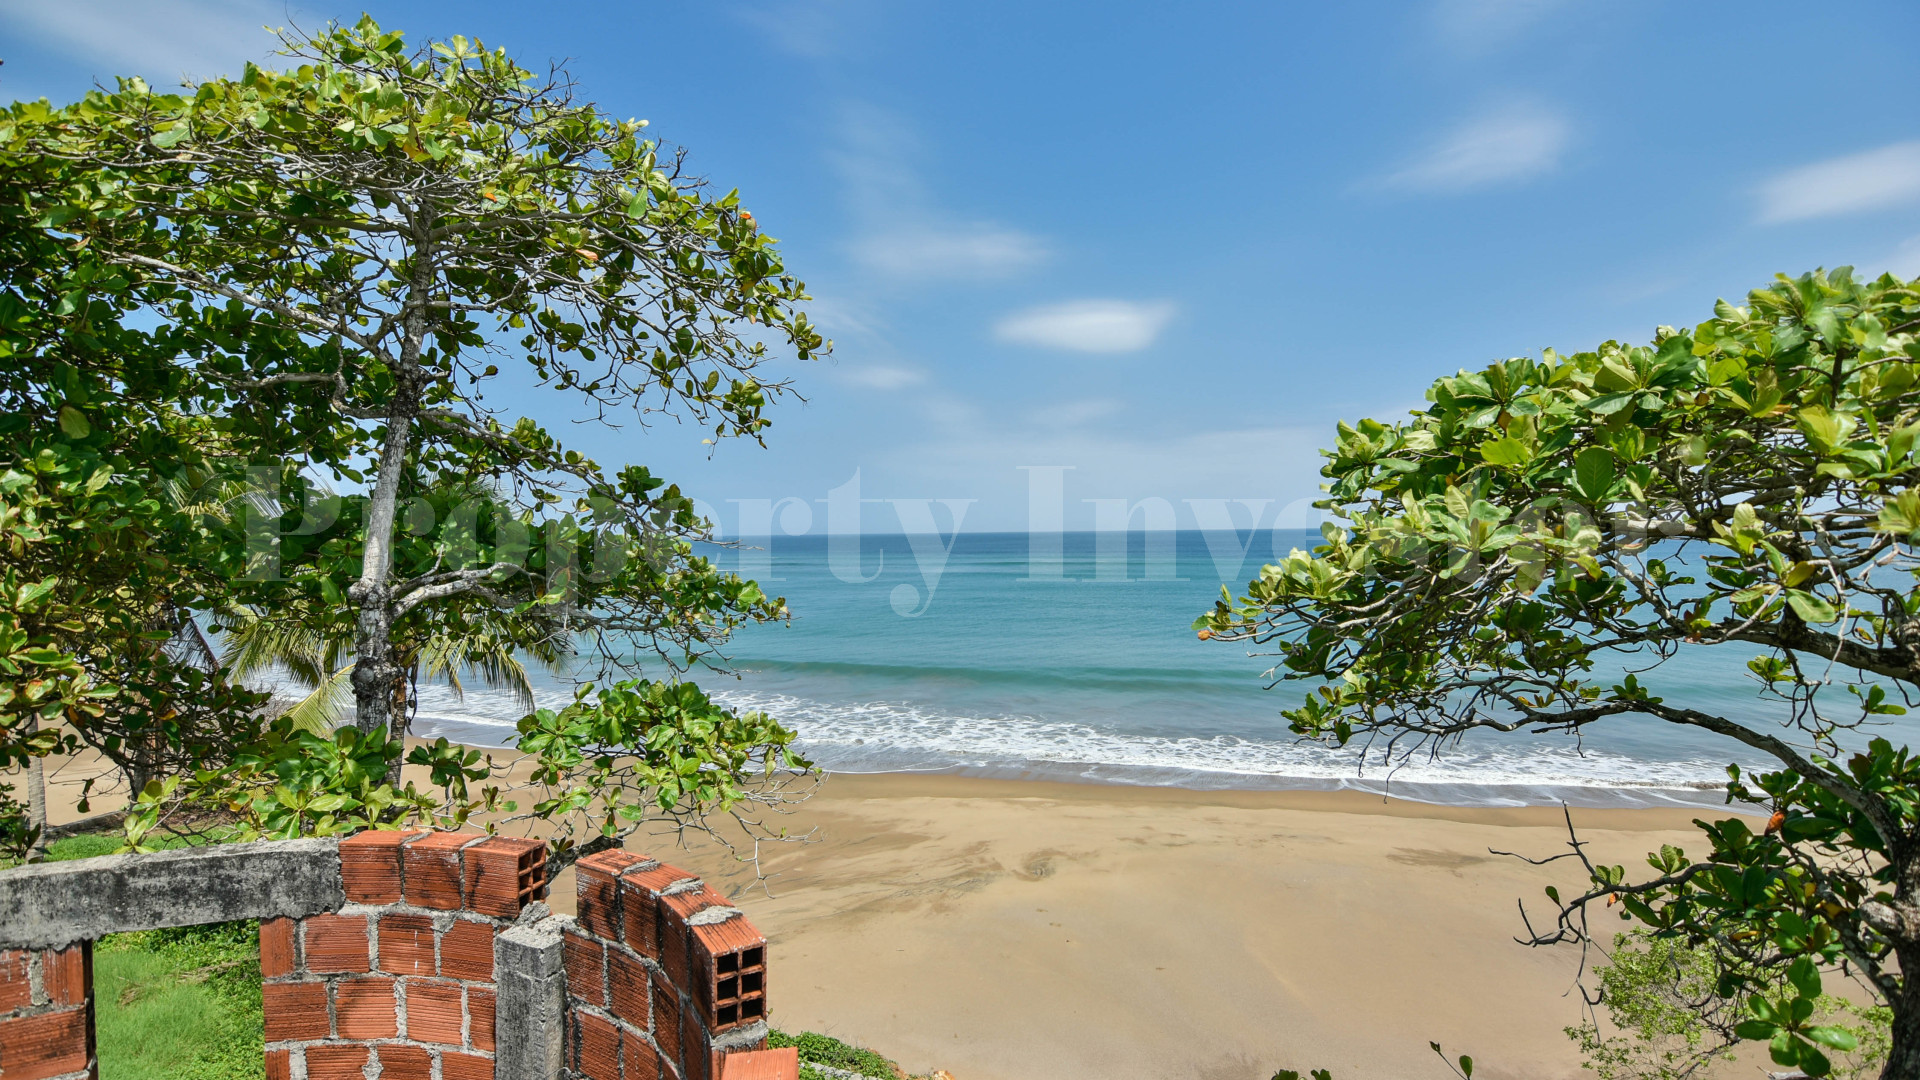 Magnificent 7 Bedroom Unfinished Beachfront Estate for Sale in Pedasi, Panama